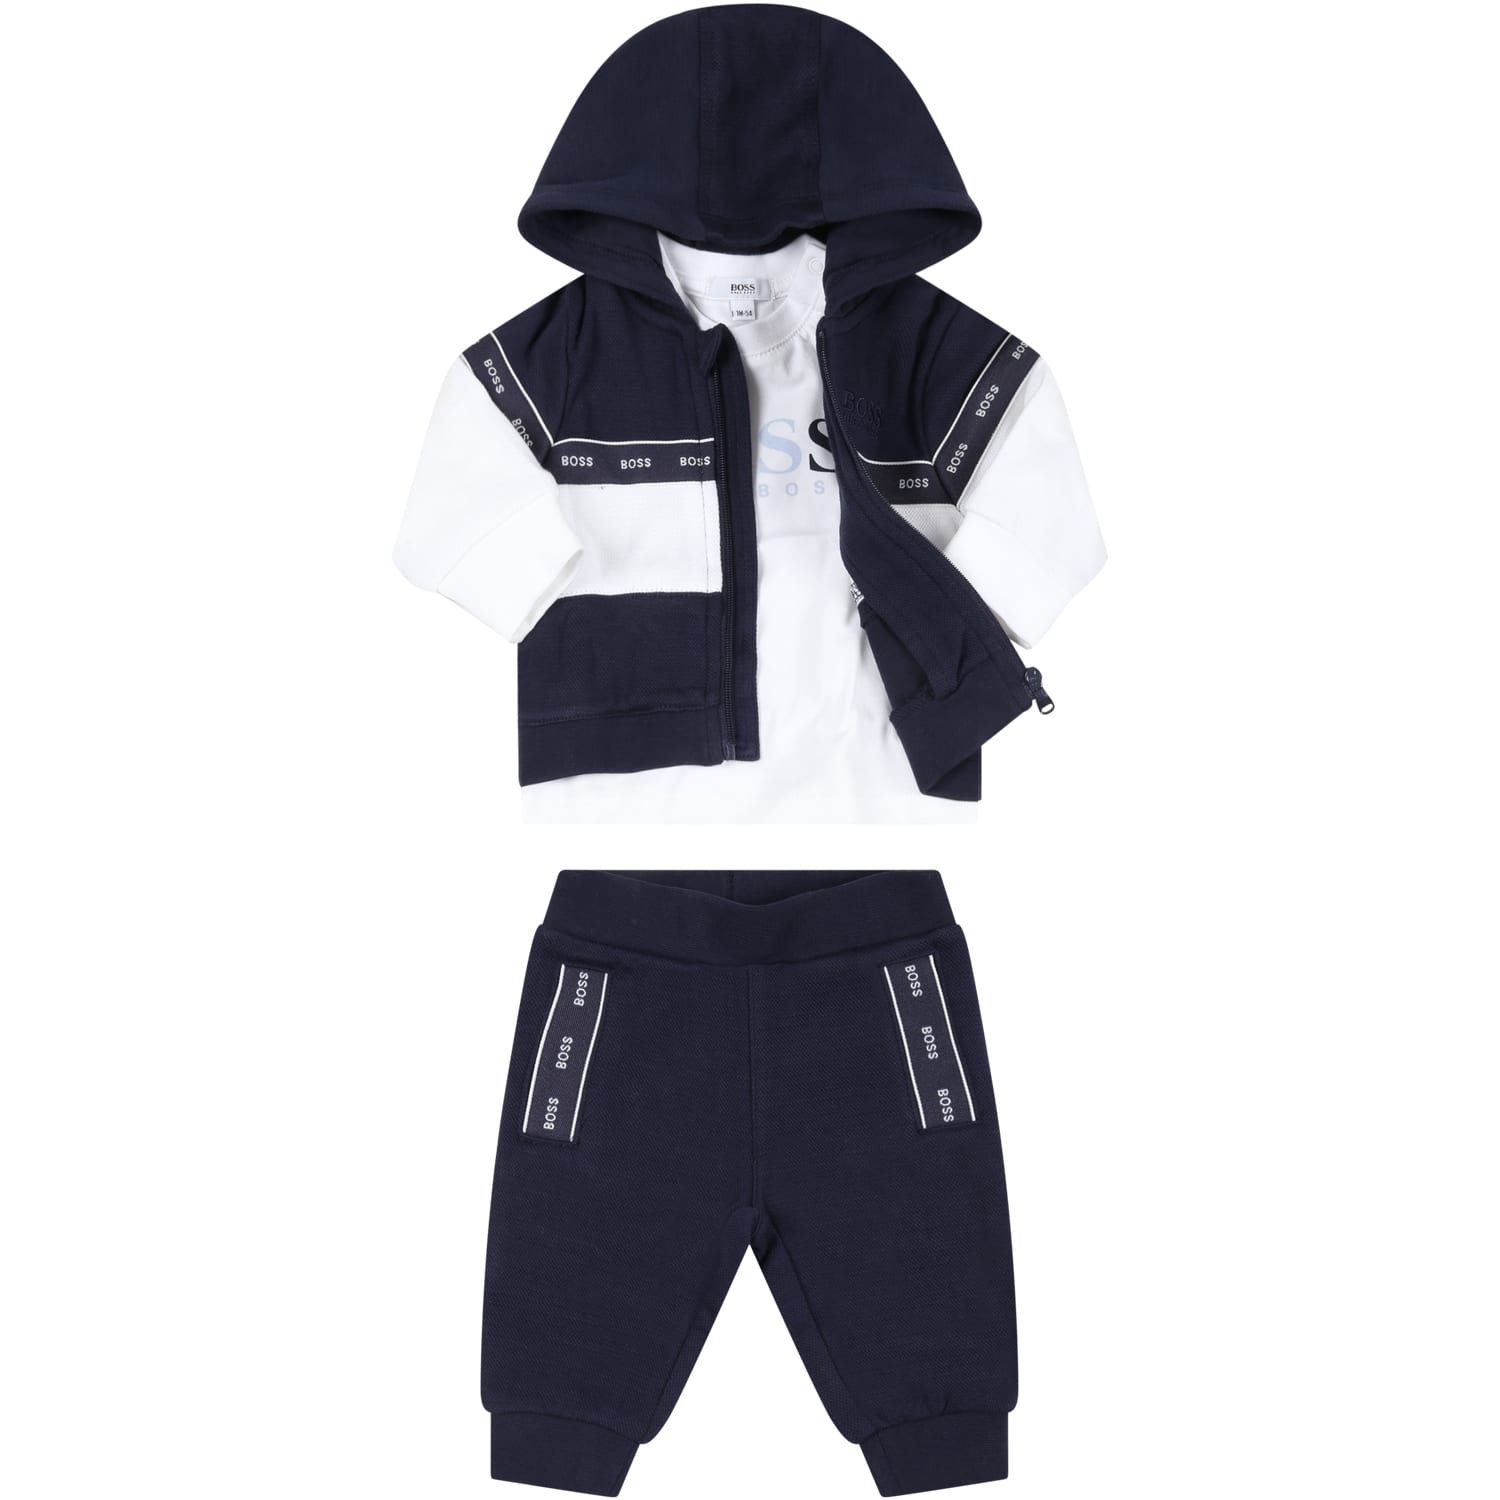 Hugo Boss Multicolor Set For Baby Kids With Logo